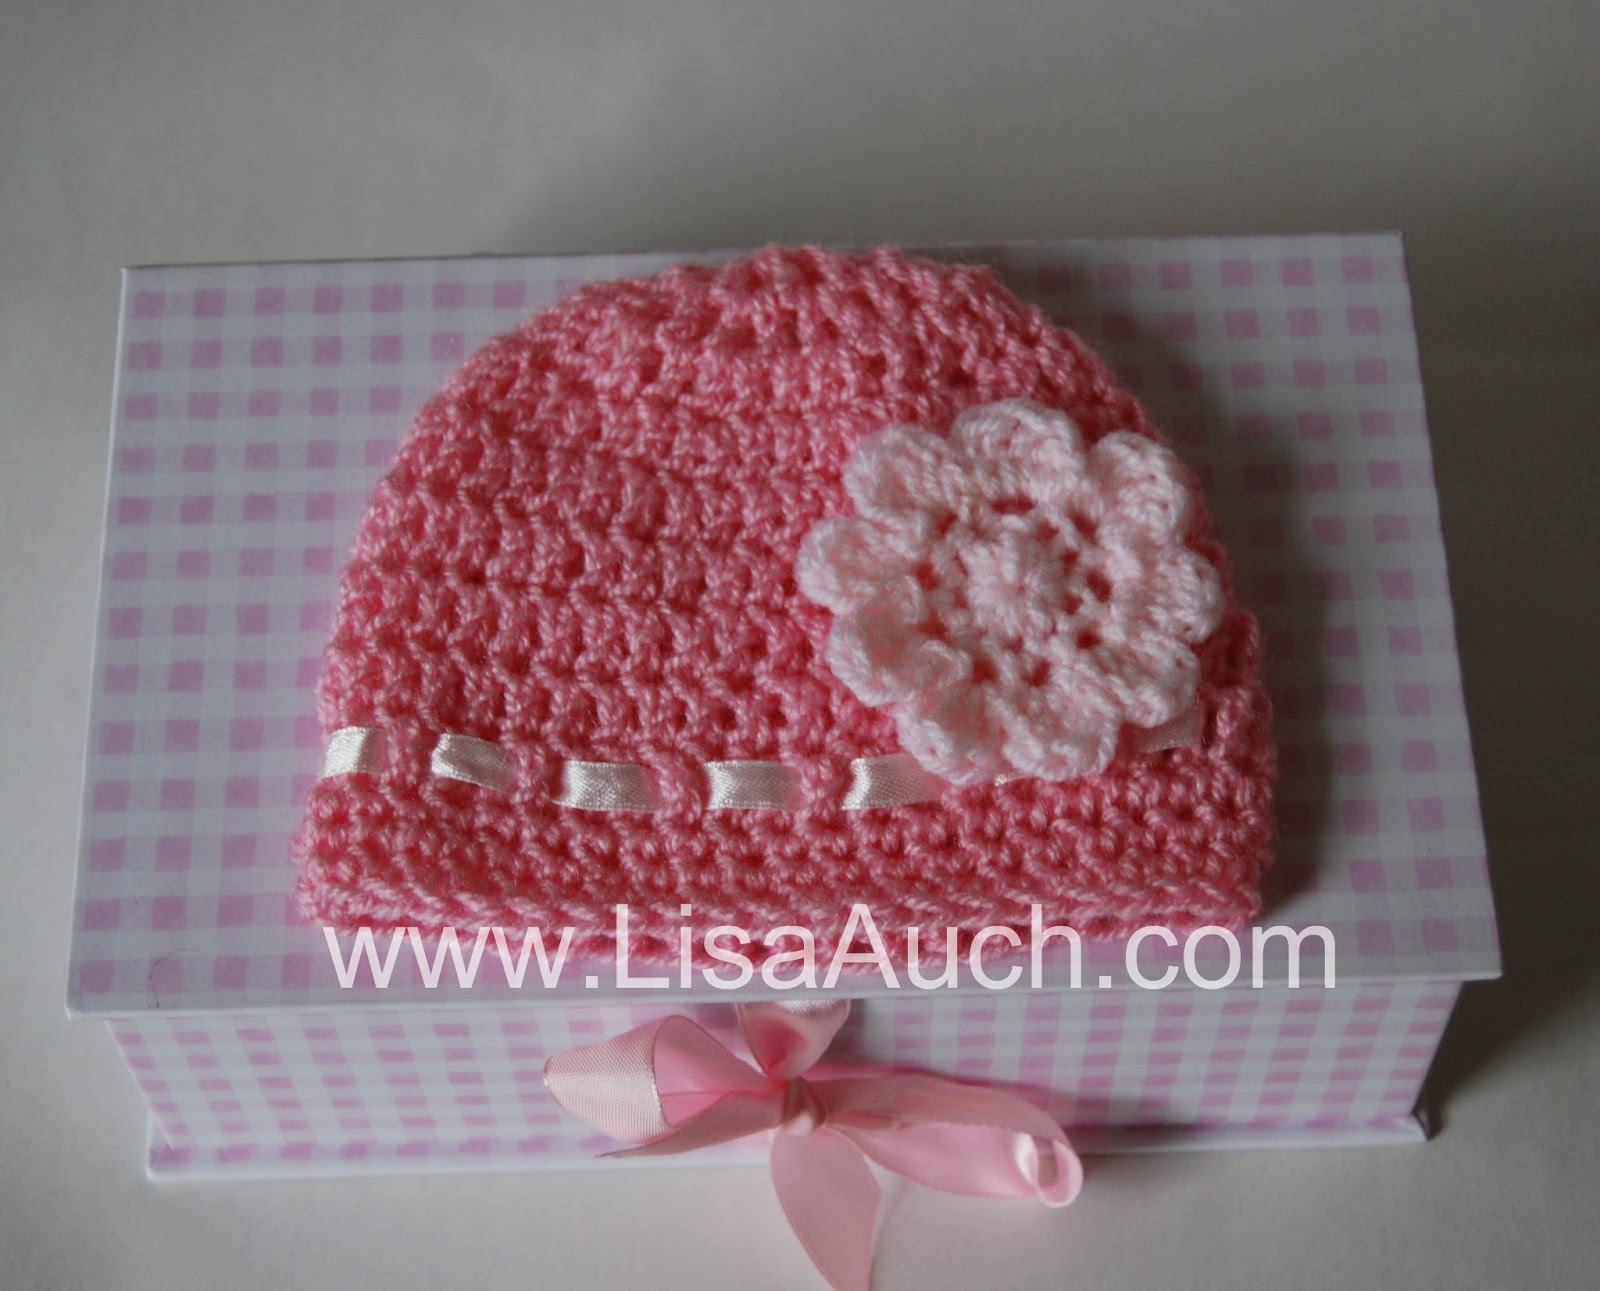 Crochet Hat With Ears Pattern Free Crochet Patterns And Designs Lisaauch Free Easy Crochet